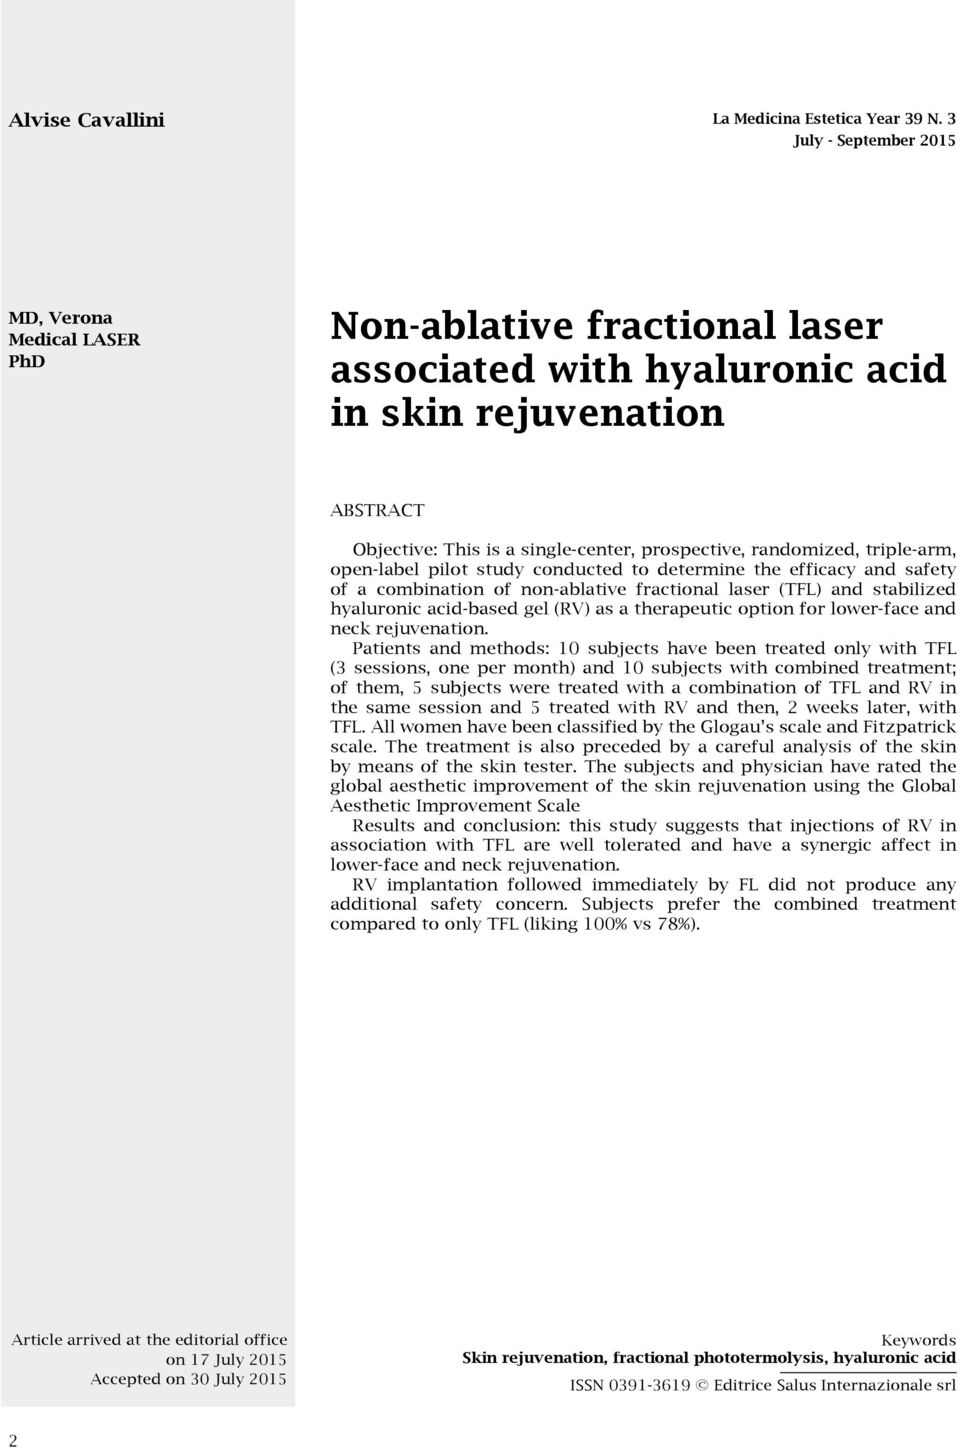 randomized, triple-arm, open-label pilot study conducted to determine the efficacy and safety of a combination of non-ablative fractional laser (TFL) and stabilized hyaluronic acid-based gel (RV) as